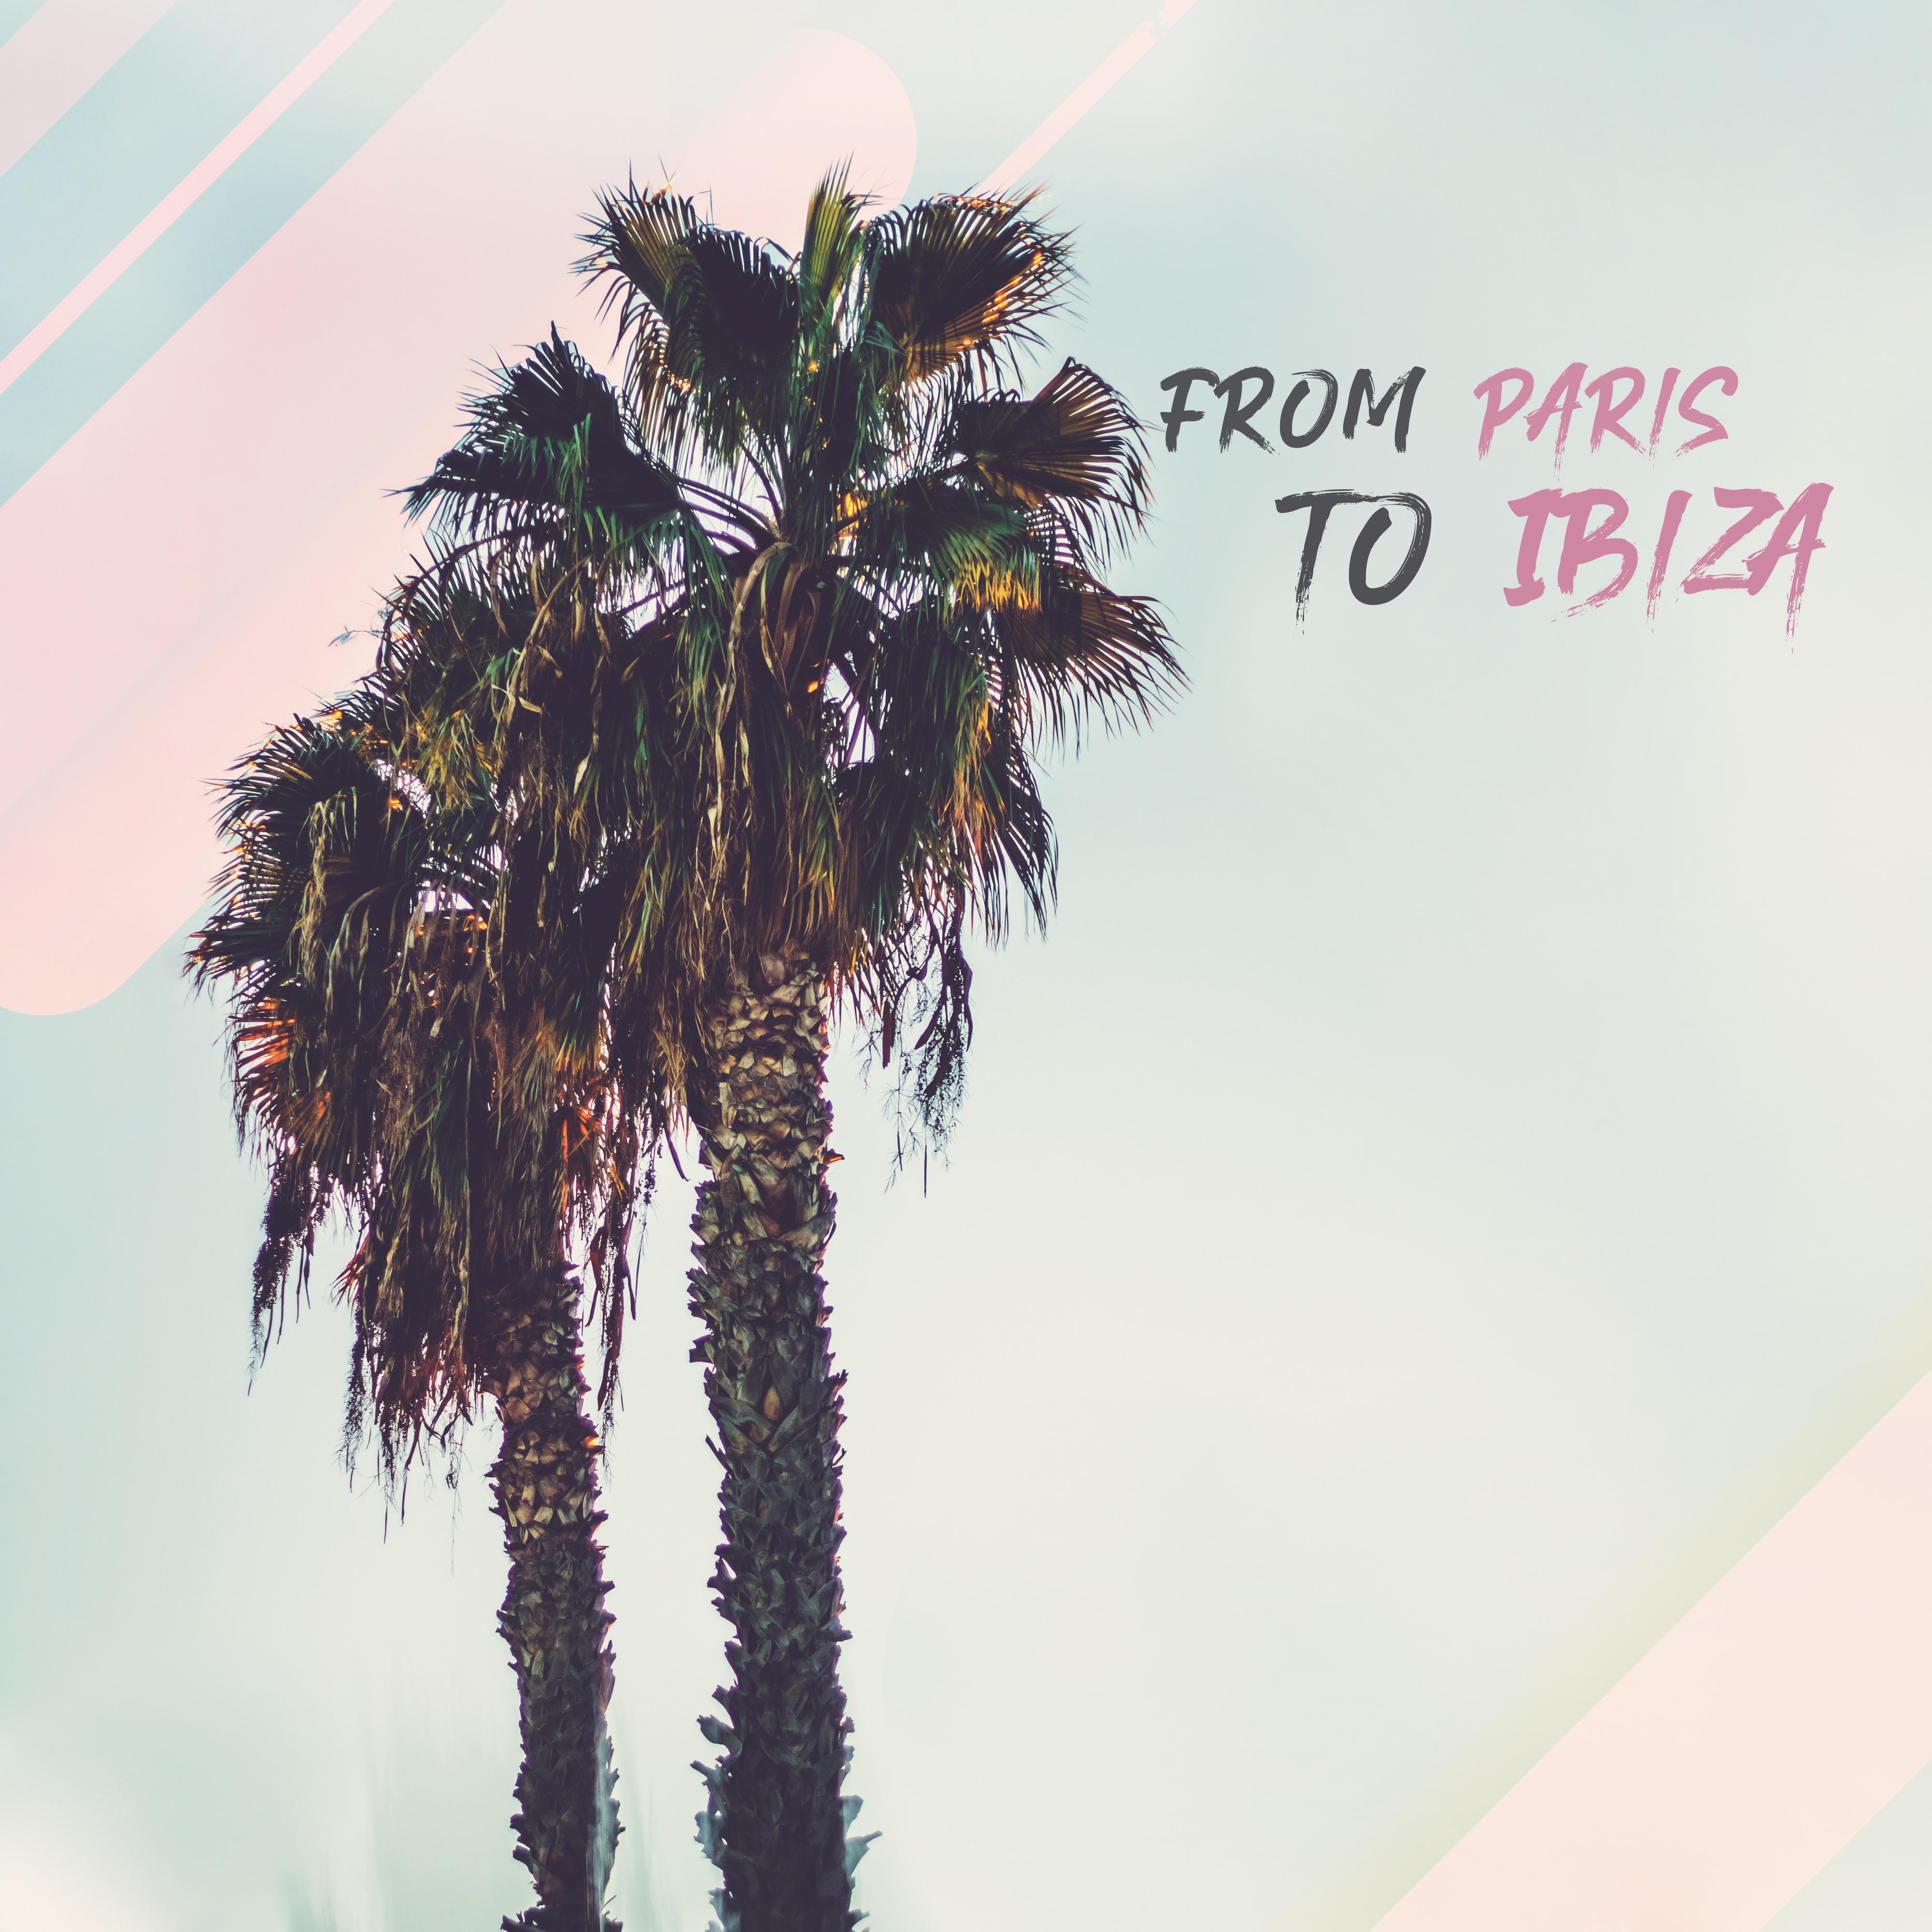 From Paris to Ibiza: Summer Compilation of Chillout Music from Ibiza